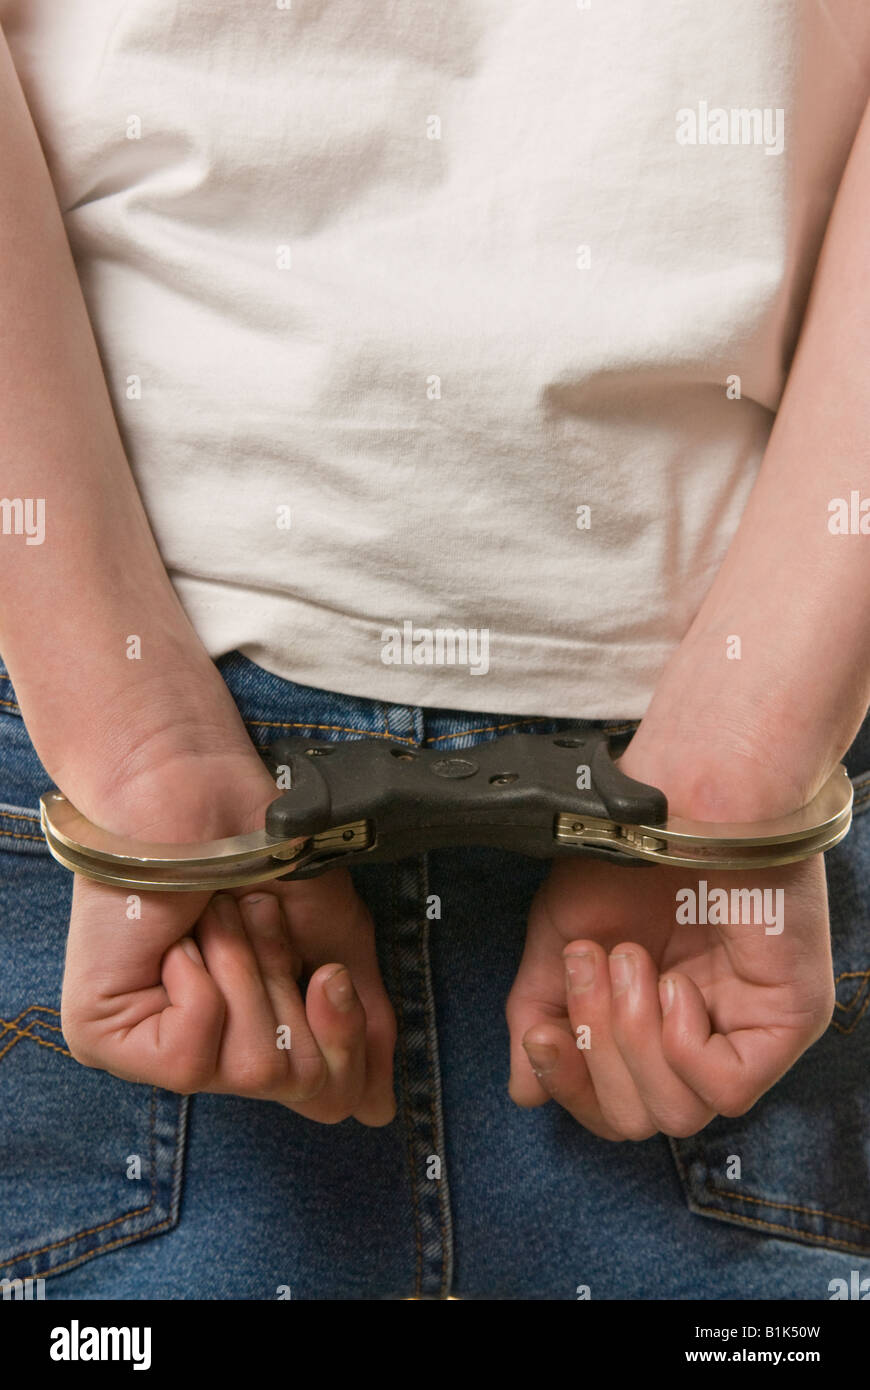 Hands cuffed behind back Stock Photo